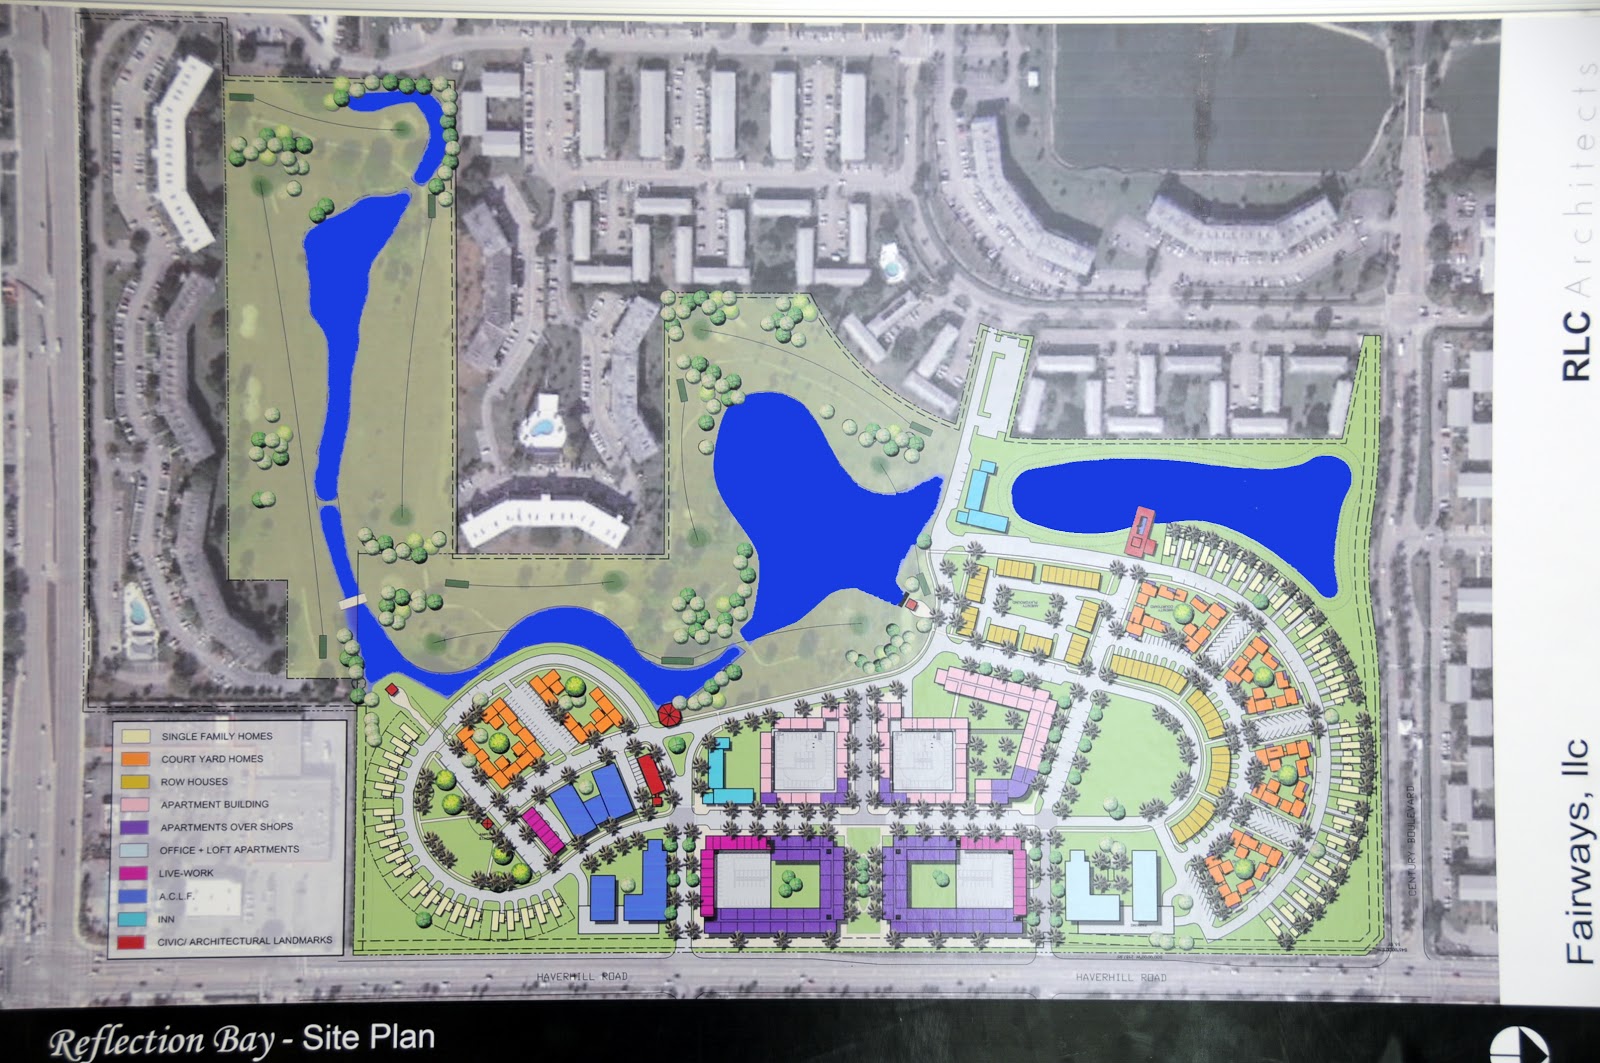 OUR VILLAGE in West Palm Beach REFLECTION BAY SITE PLAN